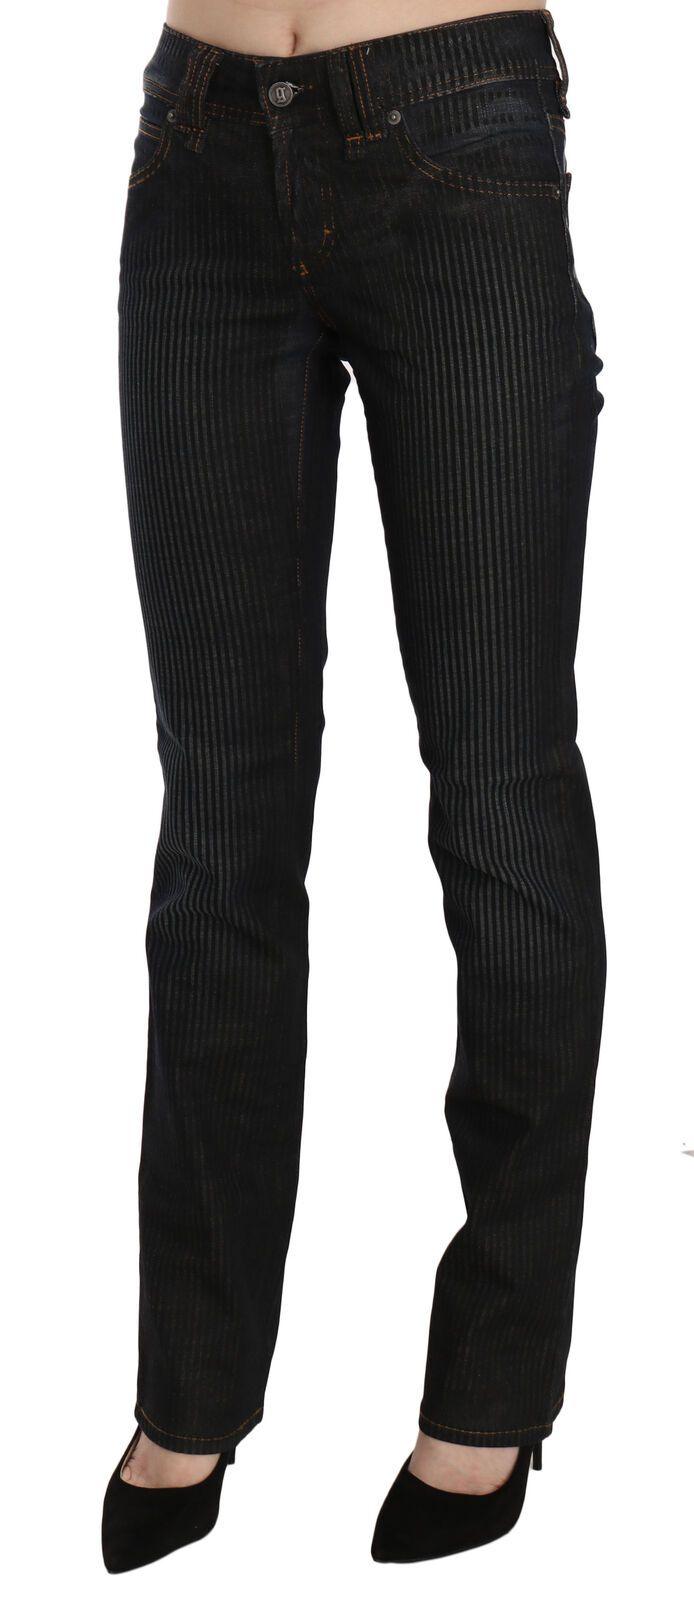 Black Mid Waist Slim Fit Corduroy Denim Casual Pants - Designed by John Galliano Available to Buy at a Discounted Price on Moon Behind The Hill Online Designer Discount Store